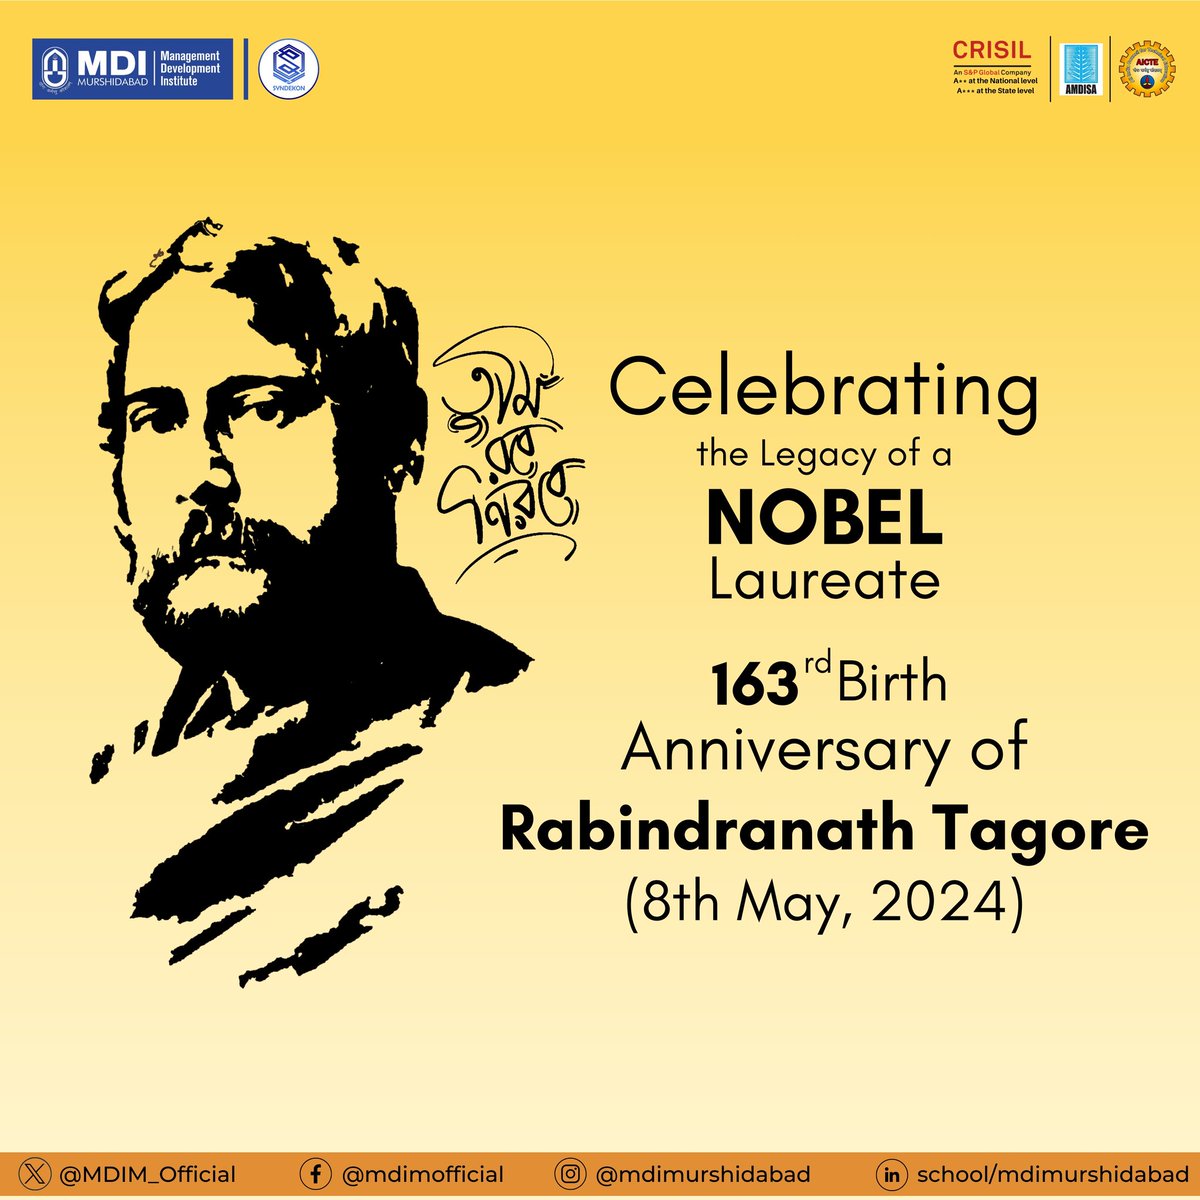 In commemoration of the 163rd Birth Anniversary of #Kaviguru #Rabindranath Tagore, a towering figure in Indian literature and culture, Indians all around the world gather to pay homage to one of India's most eminent sons. #rabindrajayanti #MDI #MBA #Management